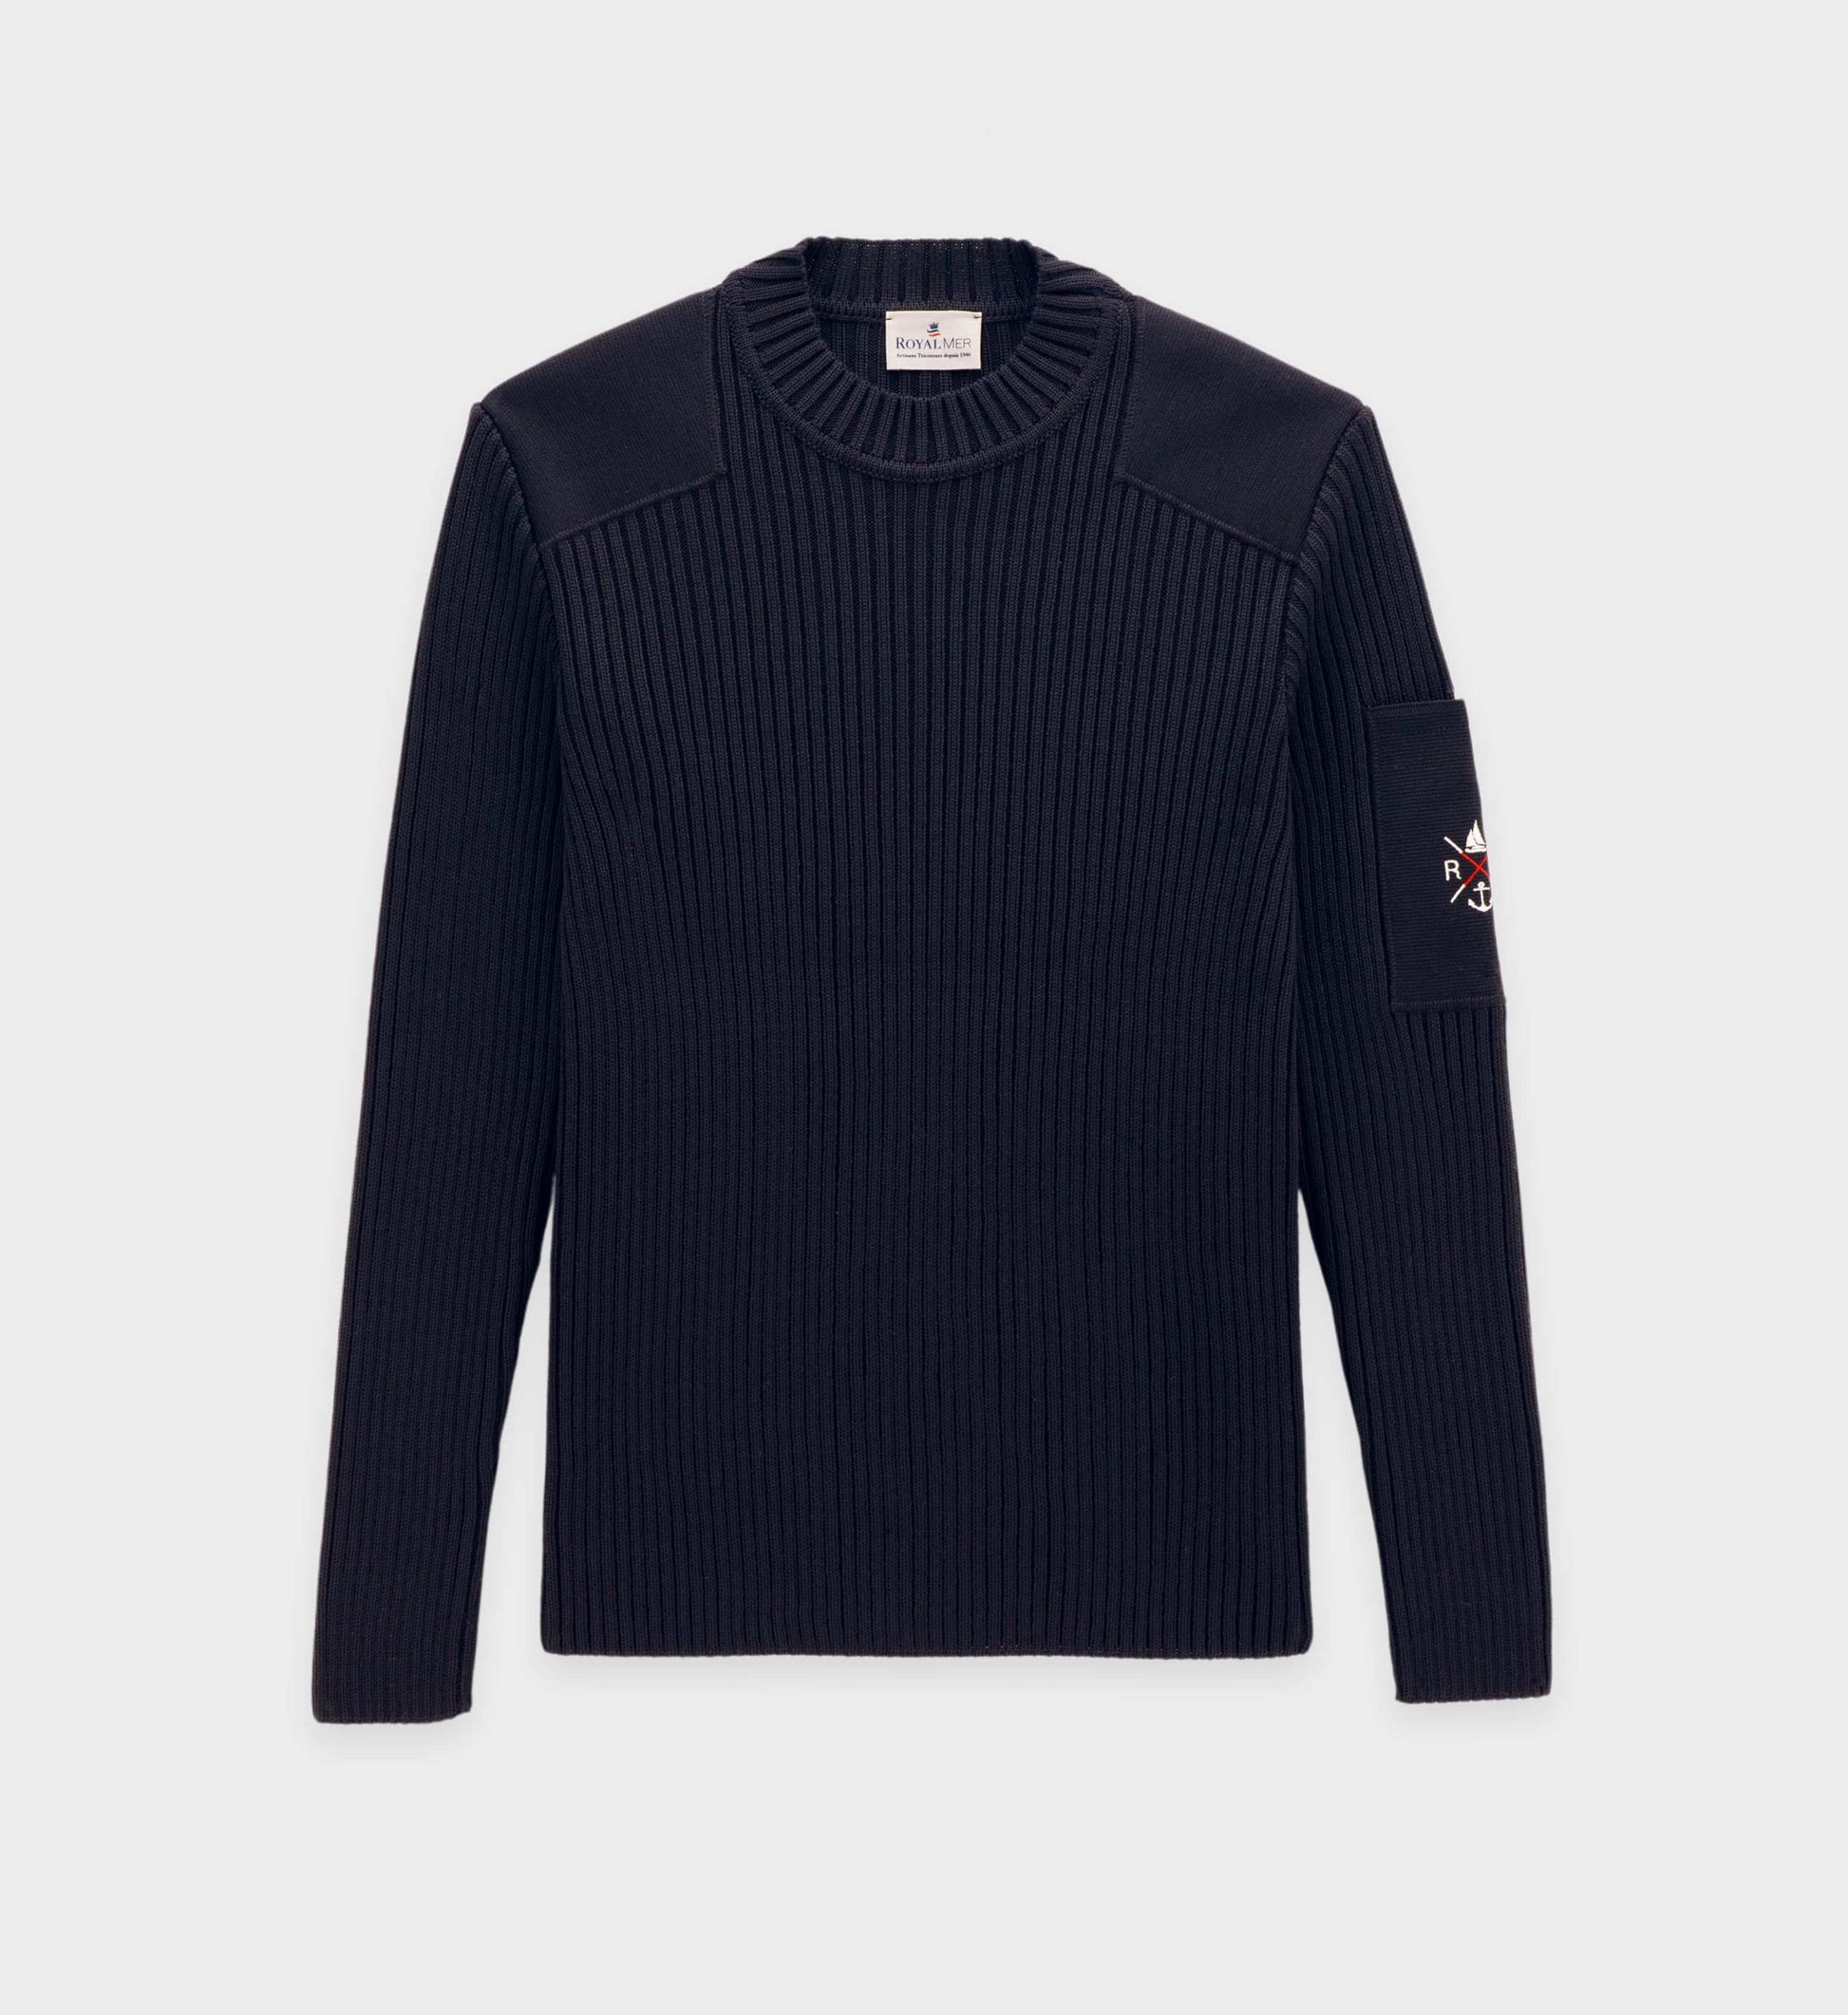 RM embroidery officer sweater